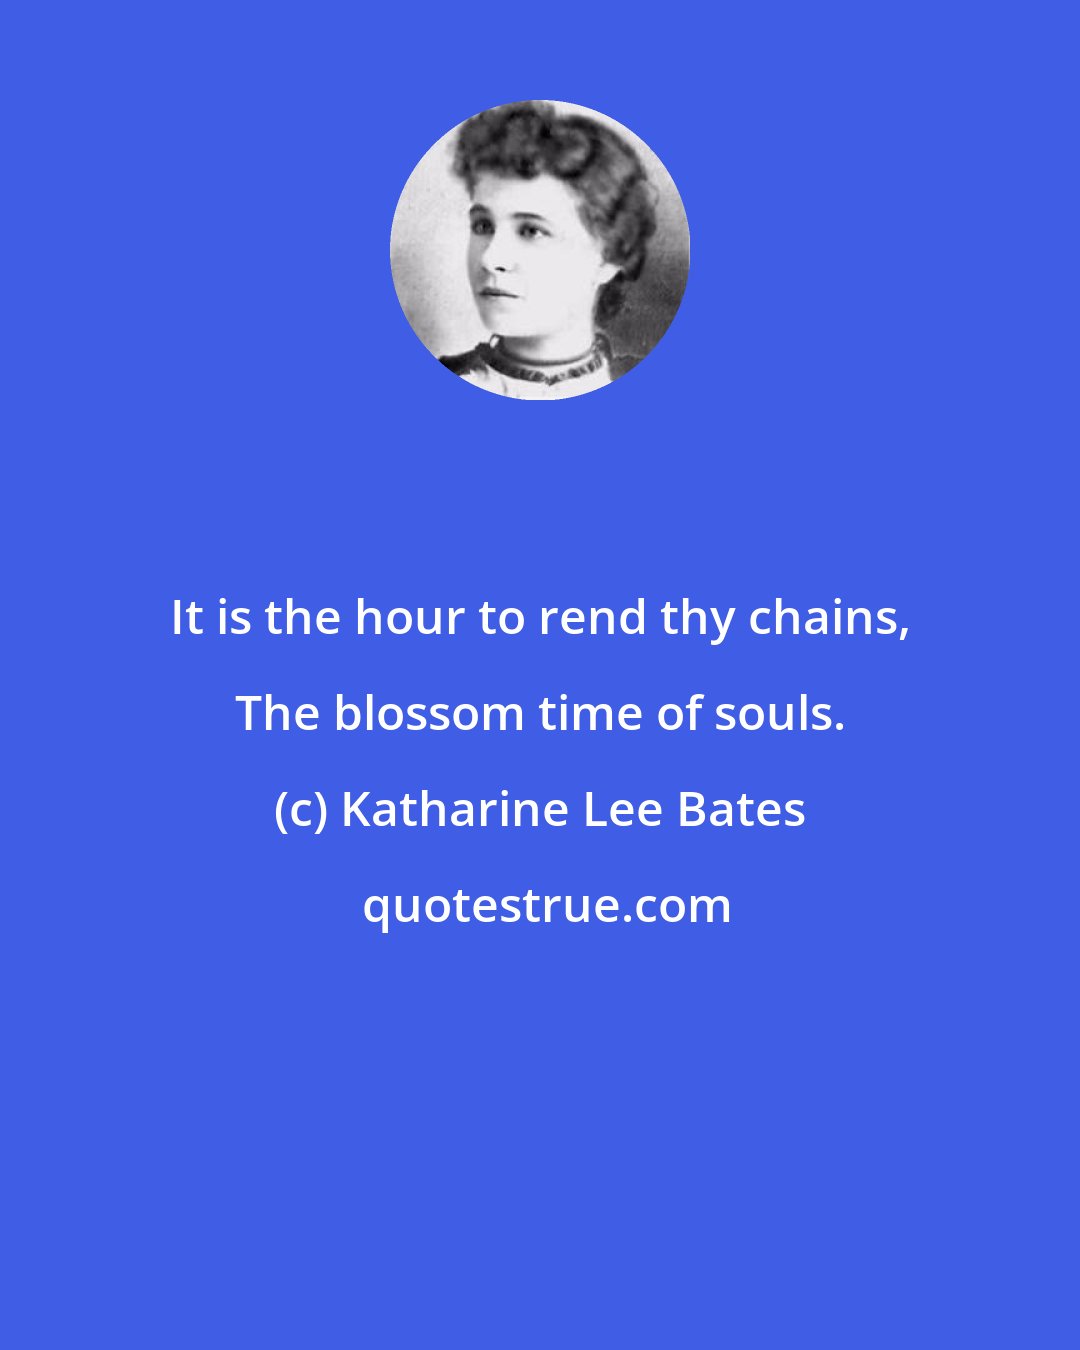 Katharine Lee Bates: It is the hour to rend thy chains, The blossom time of souls.